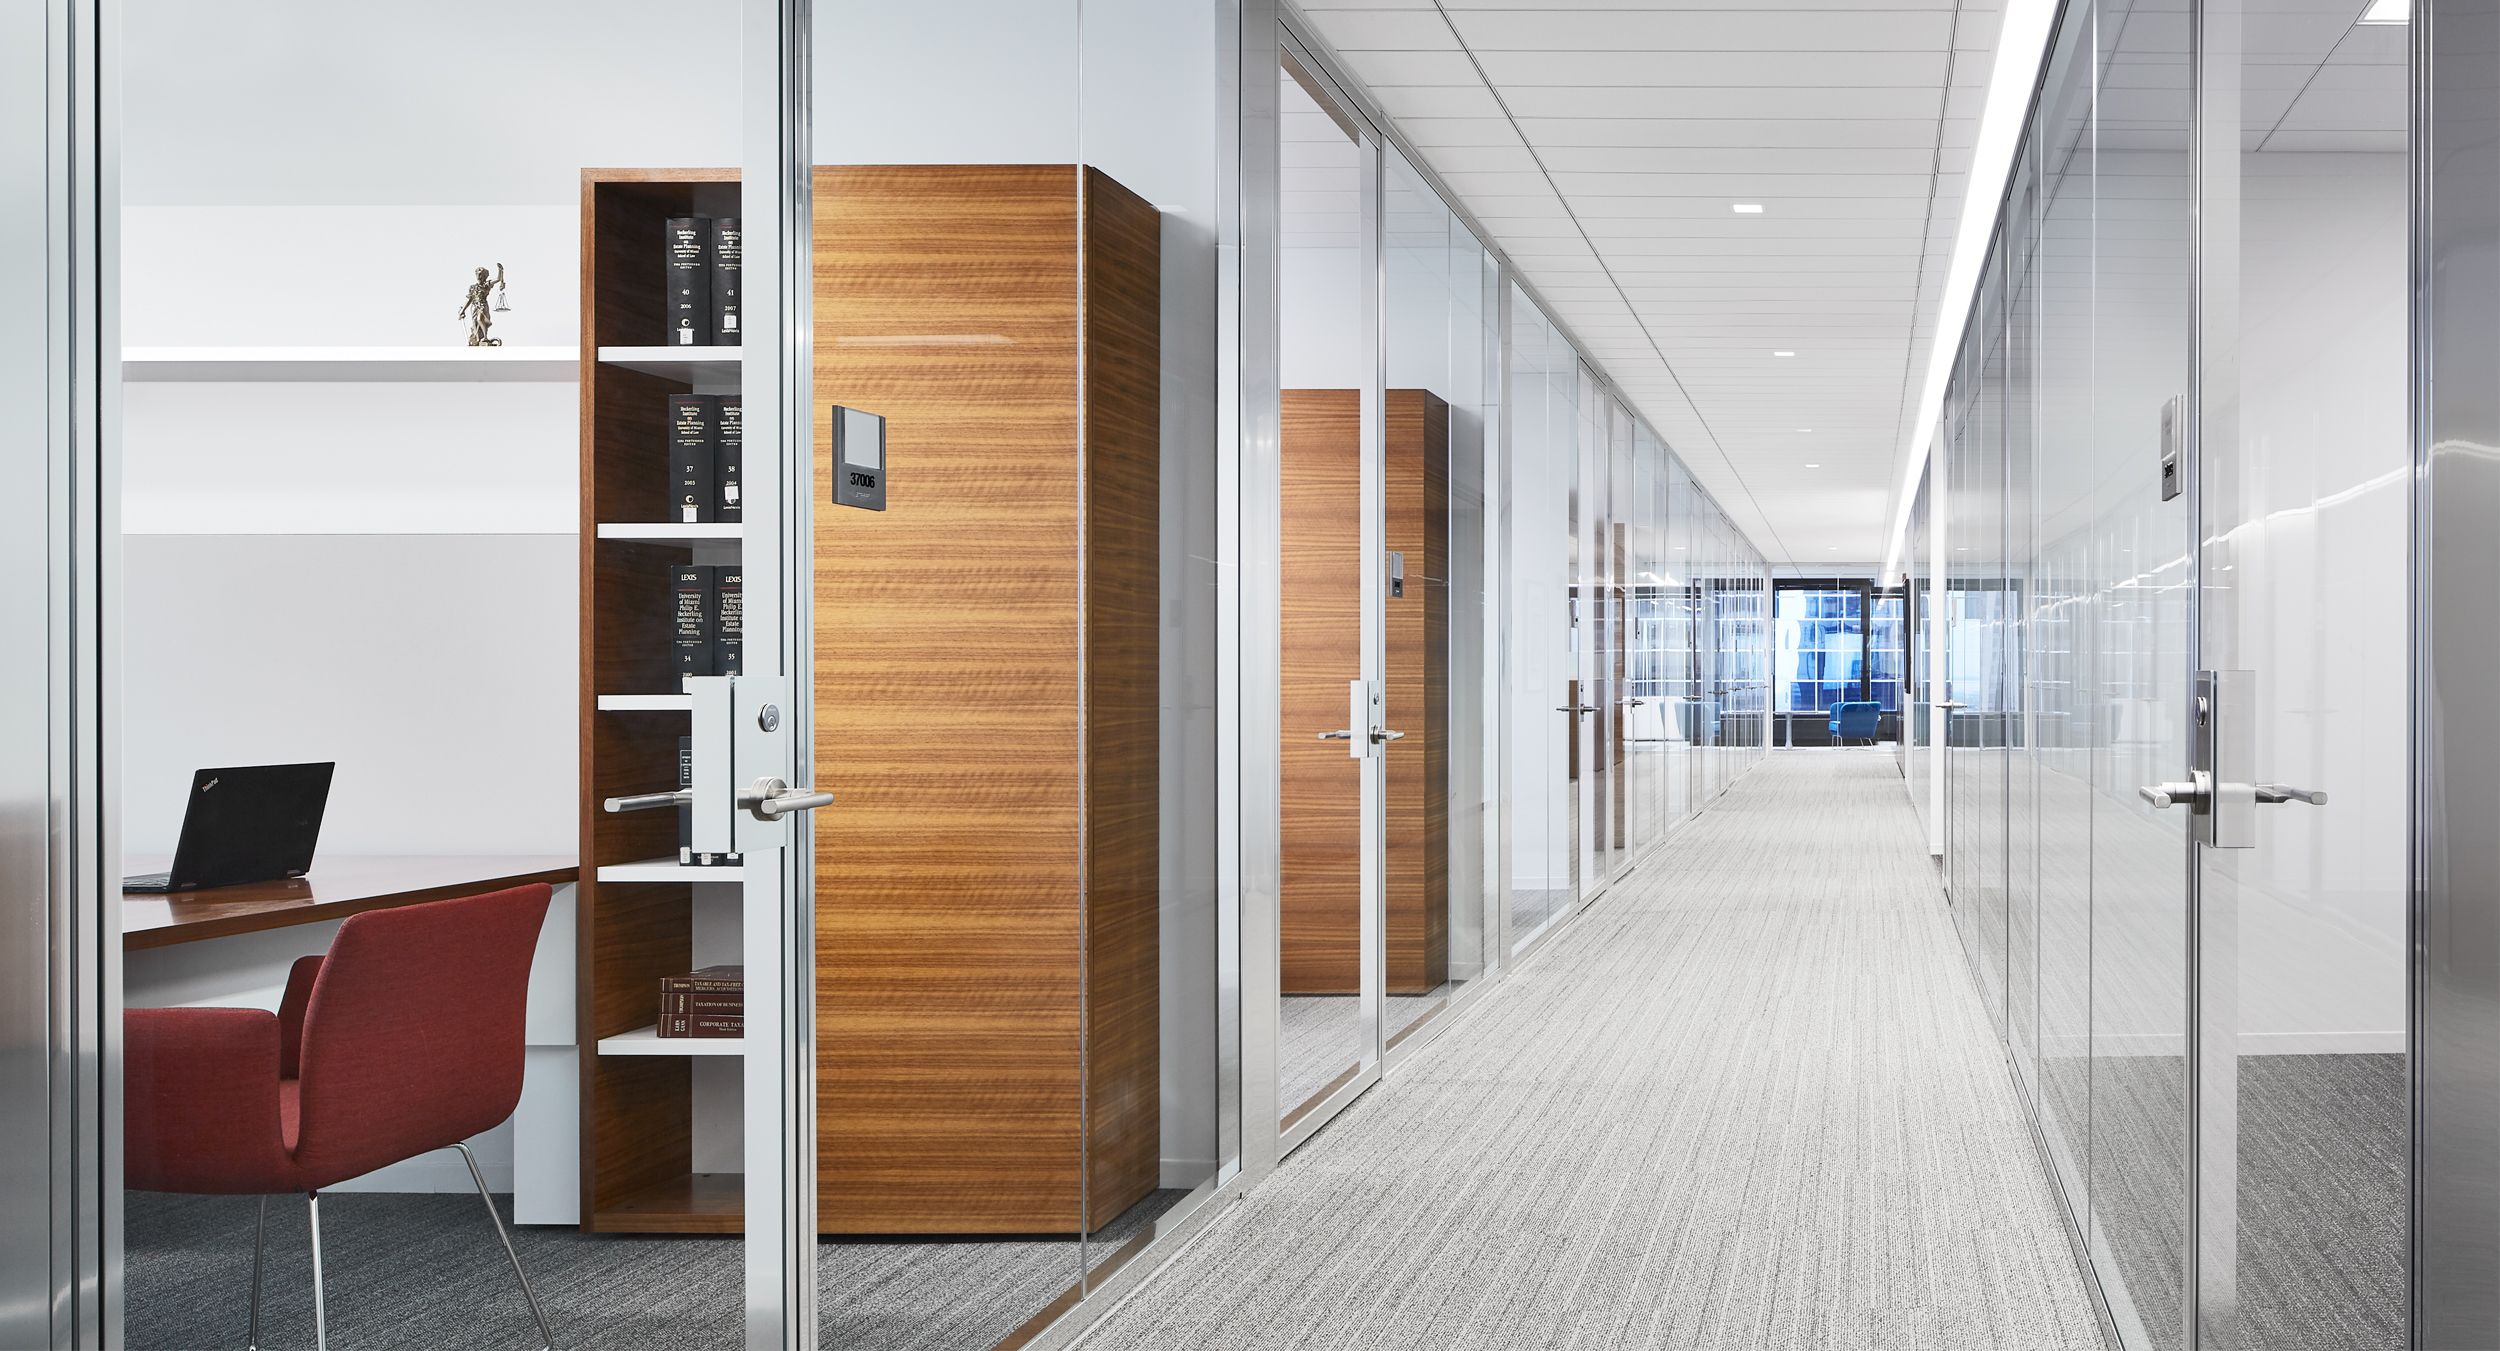 NEW MILLENNIA private offices feature grain-matched Quarter Cut Walnut and are designed to perfectly meet user needs.